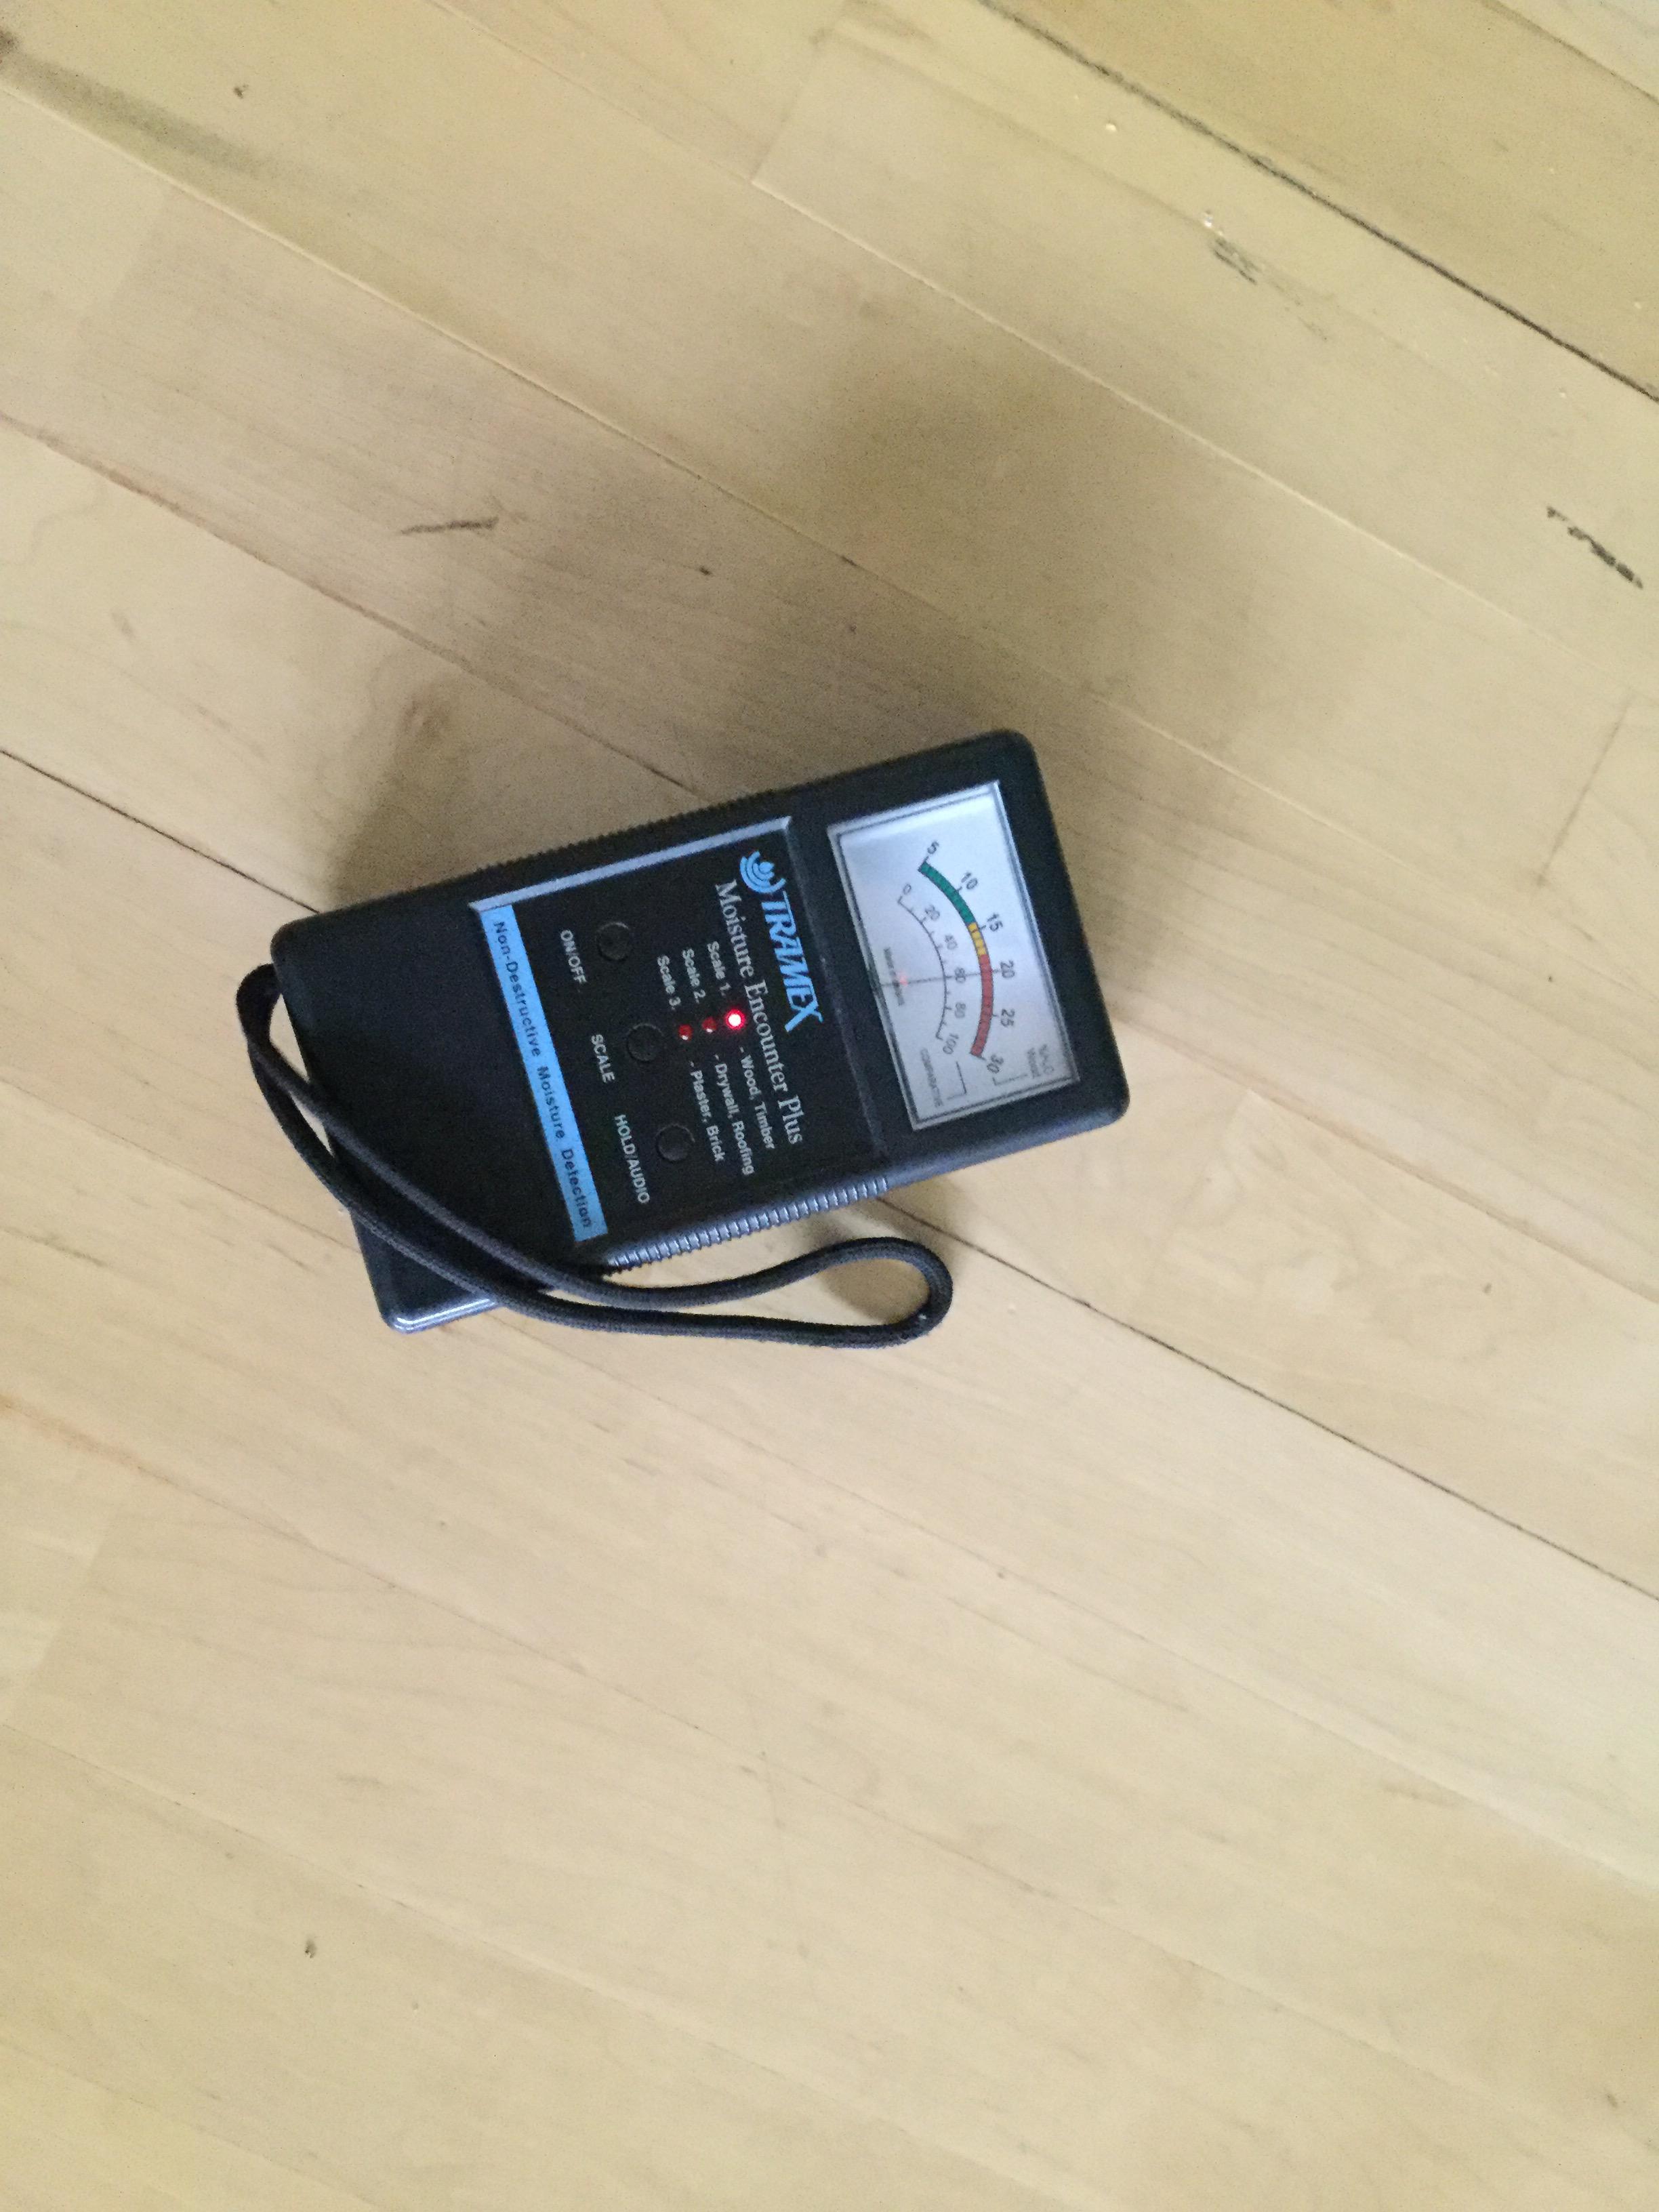 Moisture meters are one of the many tools we utilize during water damage restoration.